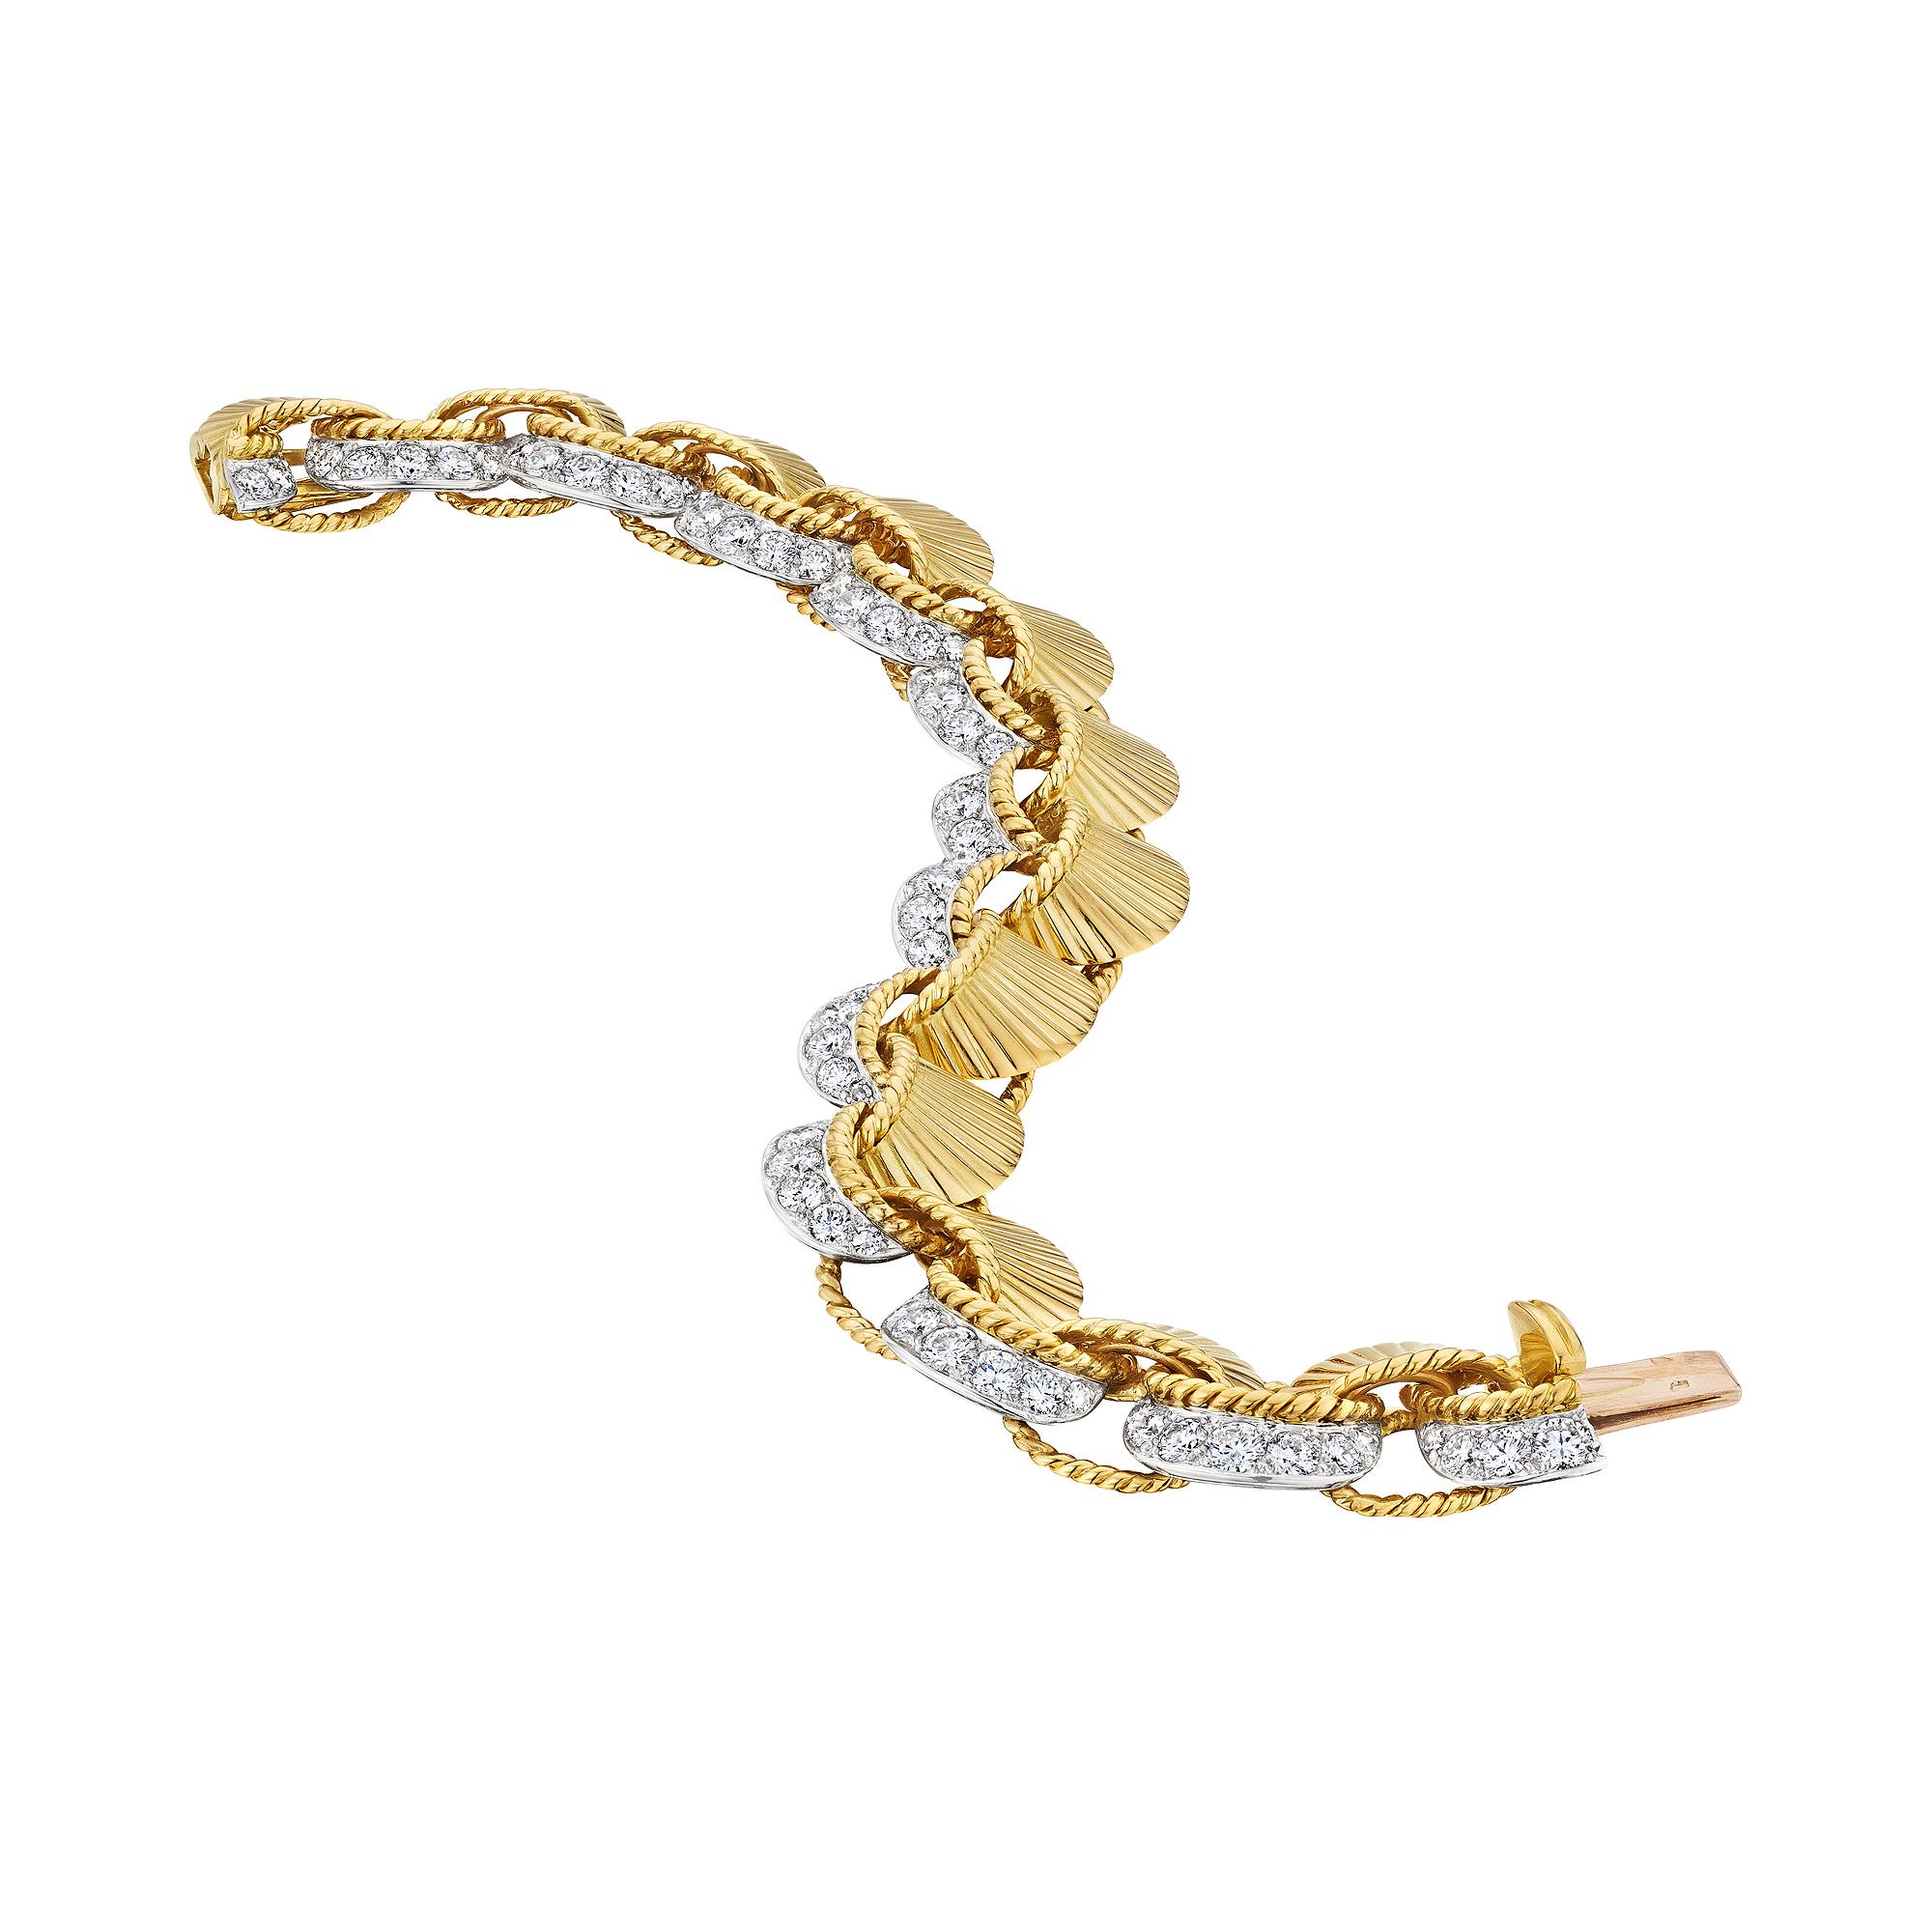 Tying ribbons around your wrist has traditionally symbolized good luck, protection, and great fortune, and this extraordinary Cartier Paris mid-century diamond, platinum, 18 karat yellow gold ribbon bracelet will have you covered.  With 12